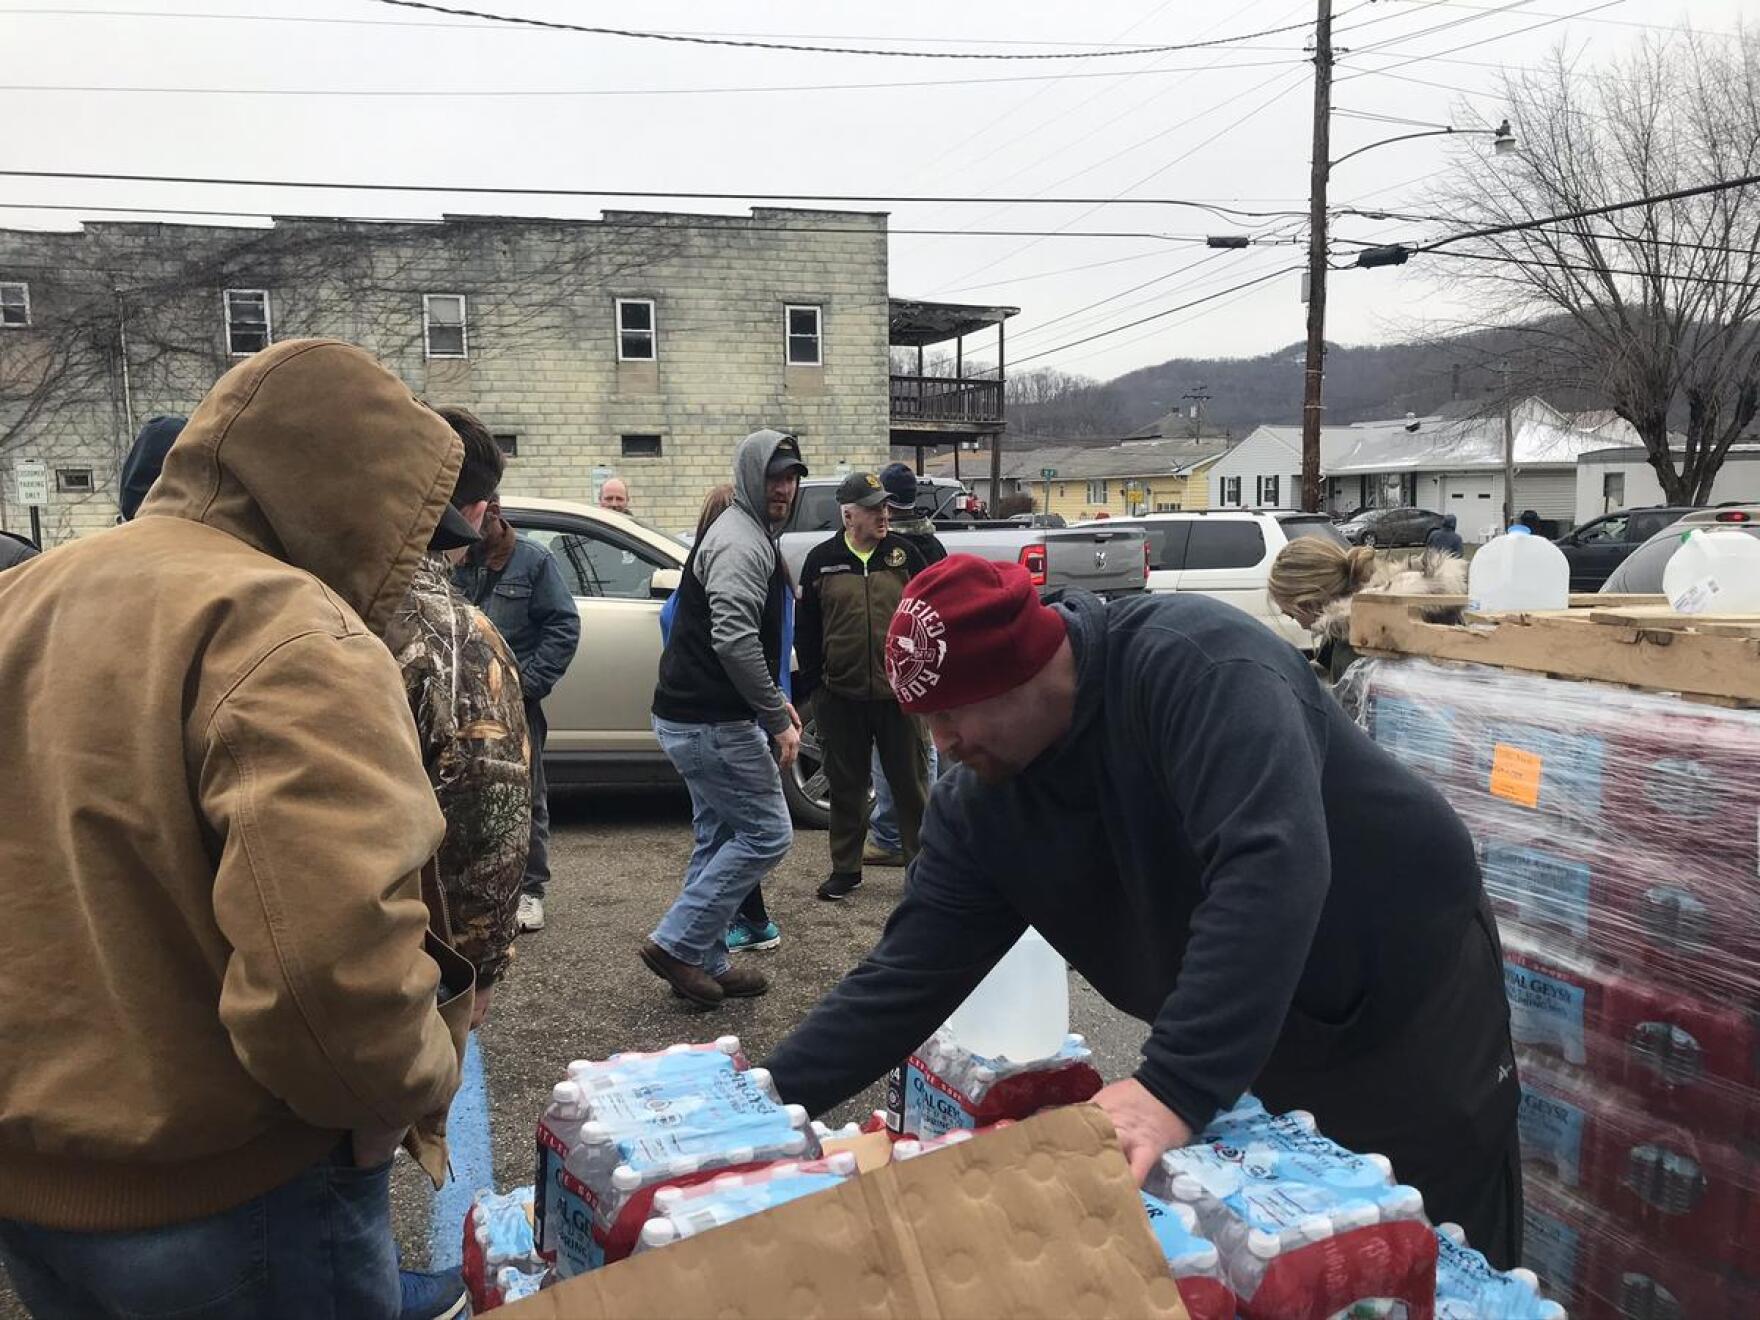 Paden City Water Works “Do Not Consume” Order Lifted